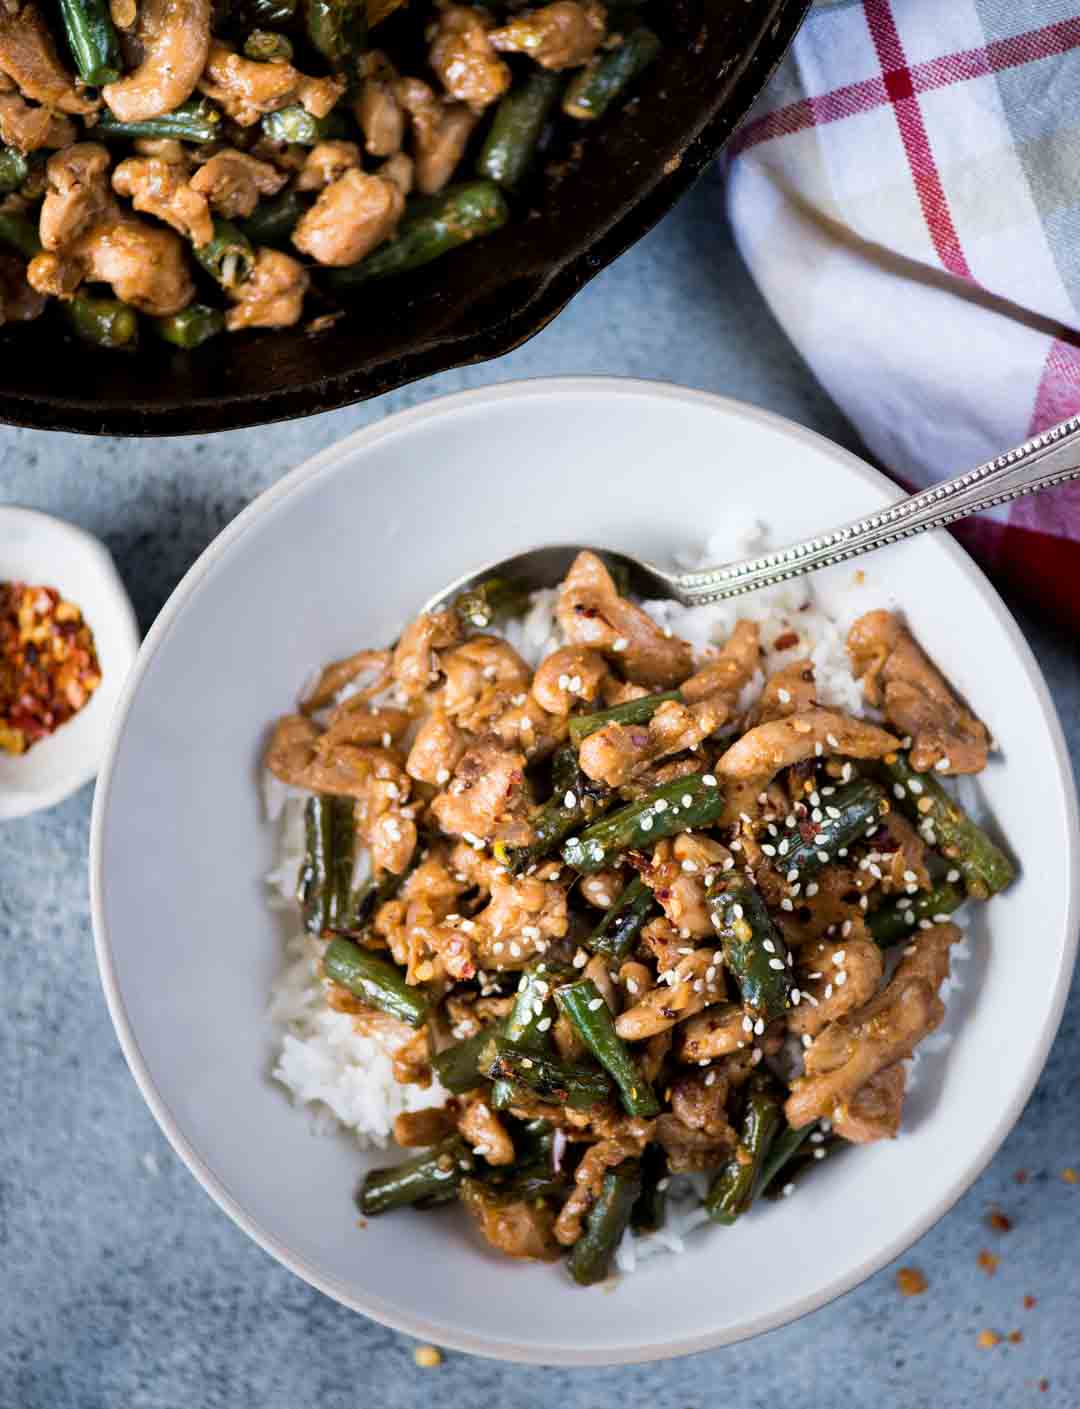 Packed with umami, this Chicken and Beans Stir Fry made with Chicken thighs, green beans tossed in a flavorful stir fry sauce.